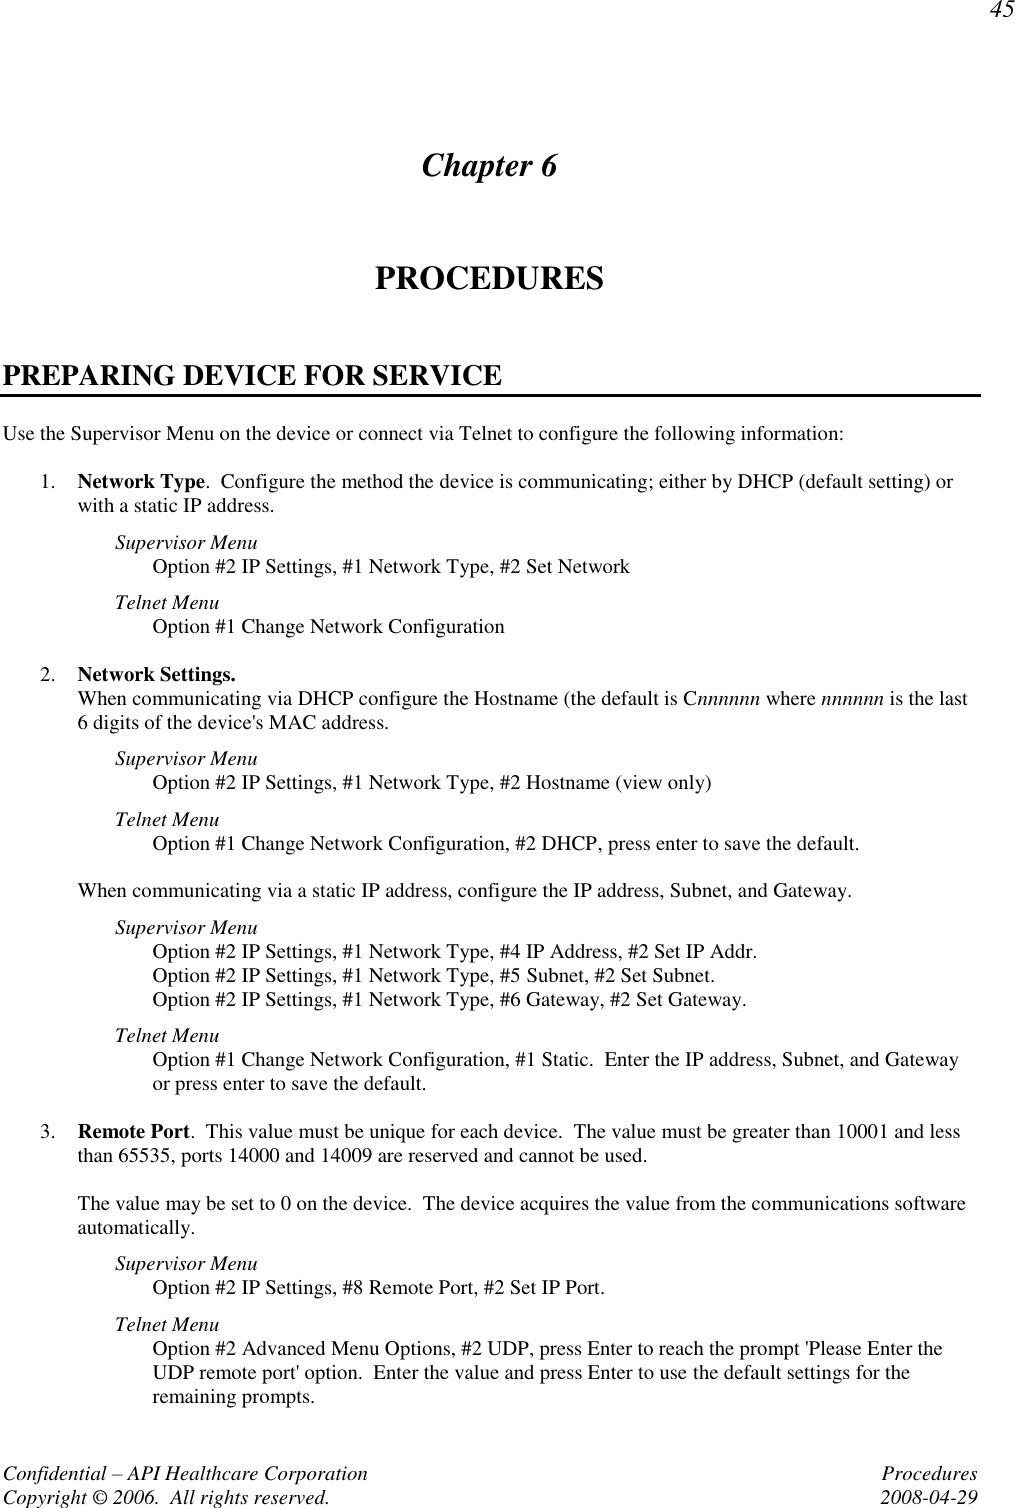 45 Confidential – API Healthcare Corporation  Procedures Copyright © 2006.  All rights reserved.  2008-04-29 Chapter 6 PROCEDURES  PREPARING DEVICE FOR SERVICE Use the Supervisor Menu on the device or connect via Telnet to configure the following information:  1. Network Type.  Configure the method the device is communicating; either by DHCP (default setting) or with a static IP address.   Supervisor Menu Option #2 IP Settings, #1 Network Type, #2 Set Network Telnet Menu Option #1 Change Network Configuration  2. Network Settings.   When communicating via DHCP configure the Hostname (the default is Cnnnnnn where nnnnnn is the last 6 digits of the device&apos;s MAC address.   Supervisor Menu Option #2 IP Settings, #1 Network Type, #2 Hostname (view only) Telnet Menu Option #1 Change Network Configuration, #2 DHCP, press enter to save the default.  When communicating via a static IP address, configure the IP address, Subnet, and Gateway. Supervisor Menu Option #2 IP Settings, #1 Network Type, #4 IP Address, #2 Set IP Addr. Option #2 IP Settings, #1 Network Type, #5 Subnet, #2 Set Subnet. Option #2 IP Settings, #1 Network Type, #6 Gateway, #2 Set Gateway. Telnet Menu Option #1 Change Network Configuration, #1 Static.  Enter the IP address, Subnet, and Gateway or press enter to save the default.  3. Remote Port.  This value must be unique for each device.  The value must be greater than 10001 and less than 65535, ports 14000 and 14009 are reserved and cannot be used.  The value may be set to 0 on the device.  The device acquires the value from the communications software automatically.   Supervisor Menu Option #2 IP Settings, #8 Remote Port, #2 Set IP Port. Telnet Menu Option #2 Advanced Menu Options, #2 UDP, press Enter to reach the prompt &apos;Please Enter the UDP remote port&apos; option.  Enter the value and press Enter to use the default settings for the remaining prompts. 